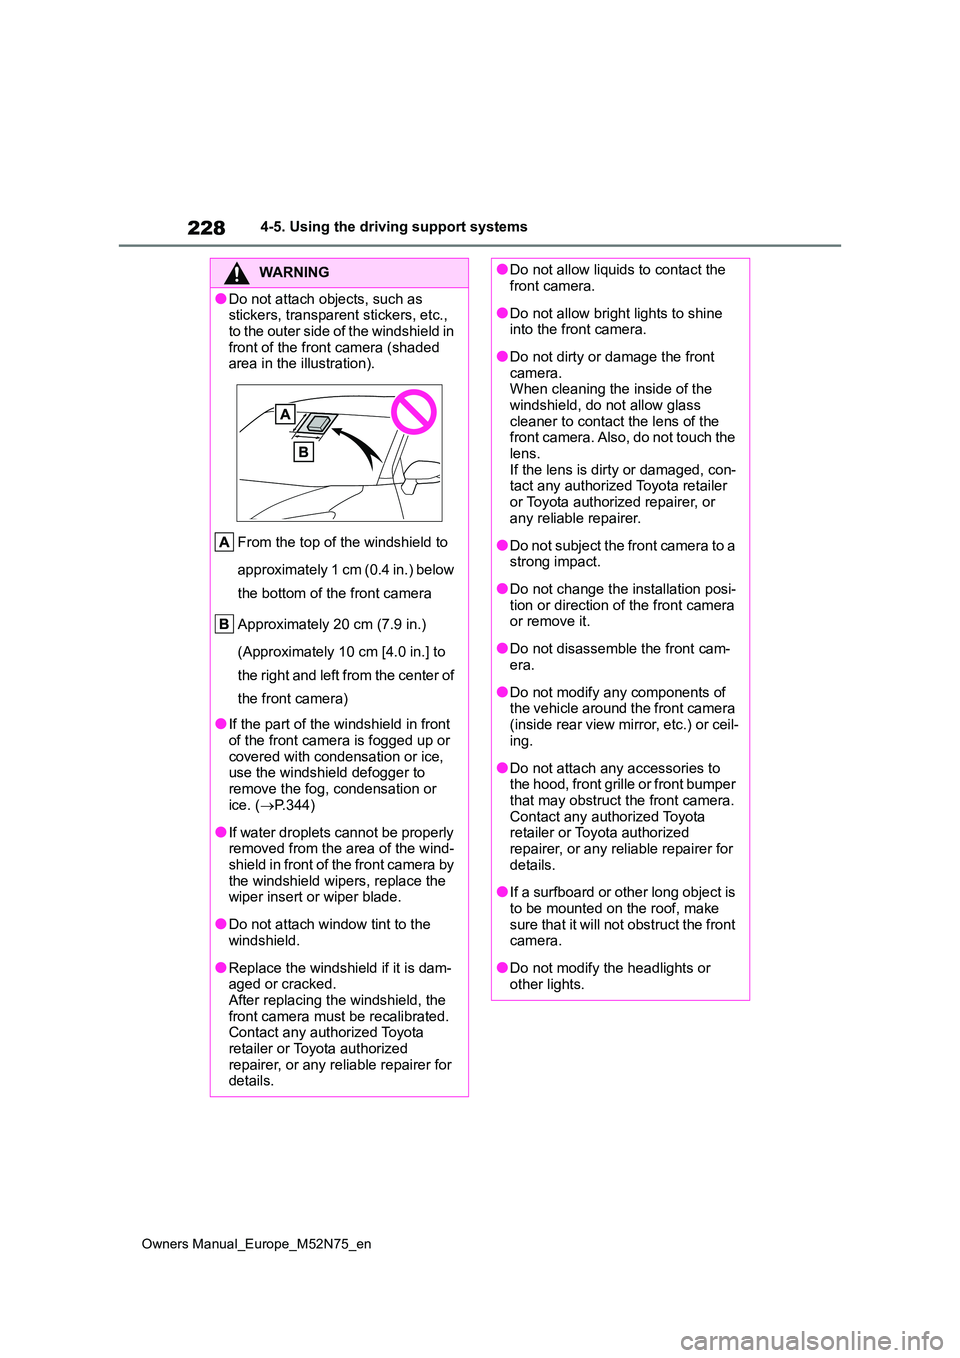 TOYOTA YARIS CROSS 2023  Owners Manual 228
Owners Manual_Europe_M52N75_en
4-5. Using the driving support systems
WARNING
●Do not attach objects, such as  stickers, transparent stickers, etc.,  
to the outer side of the windshield in  fro